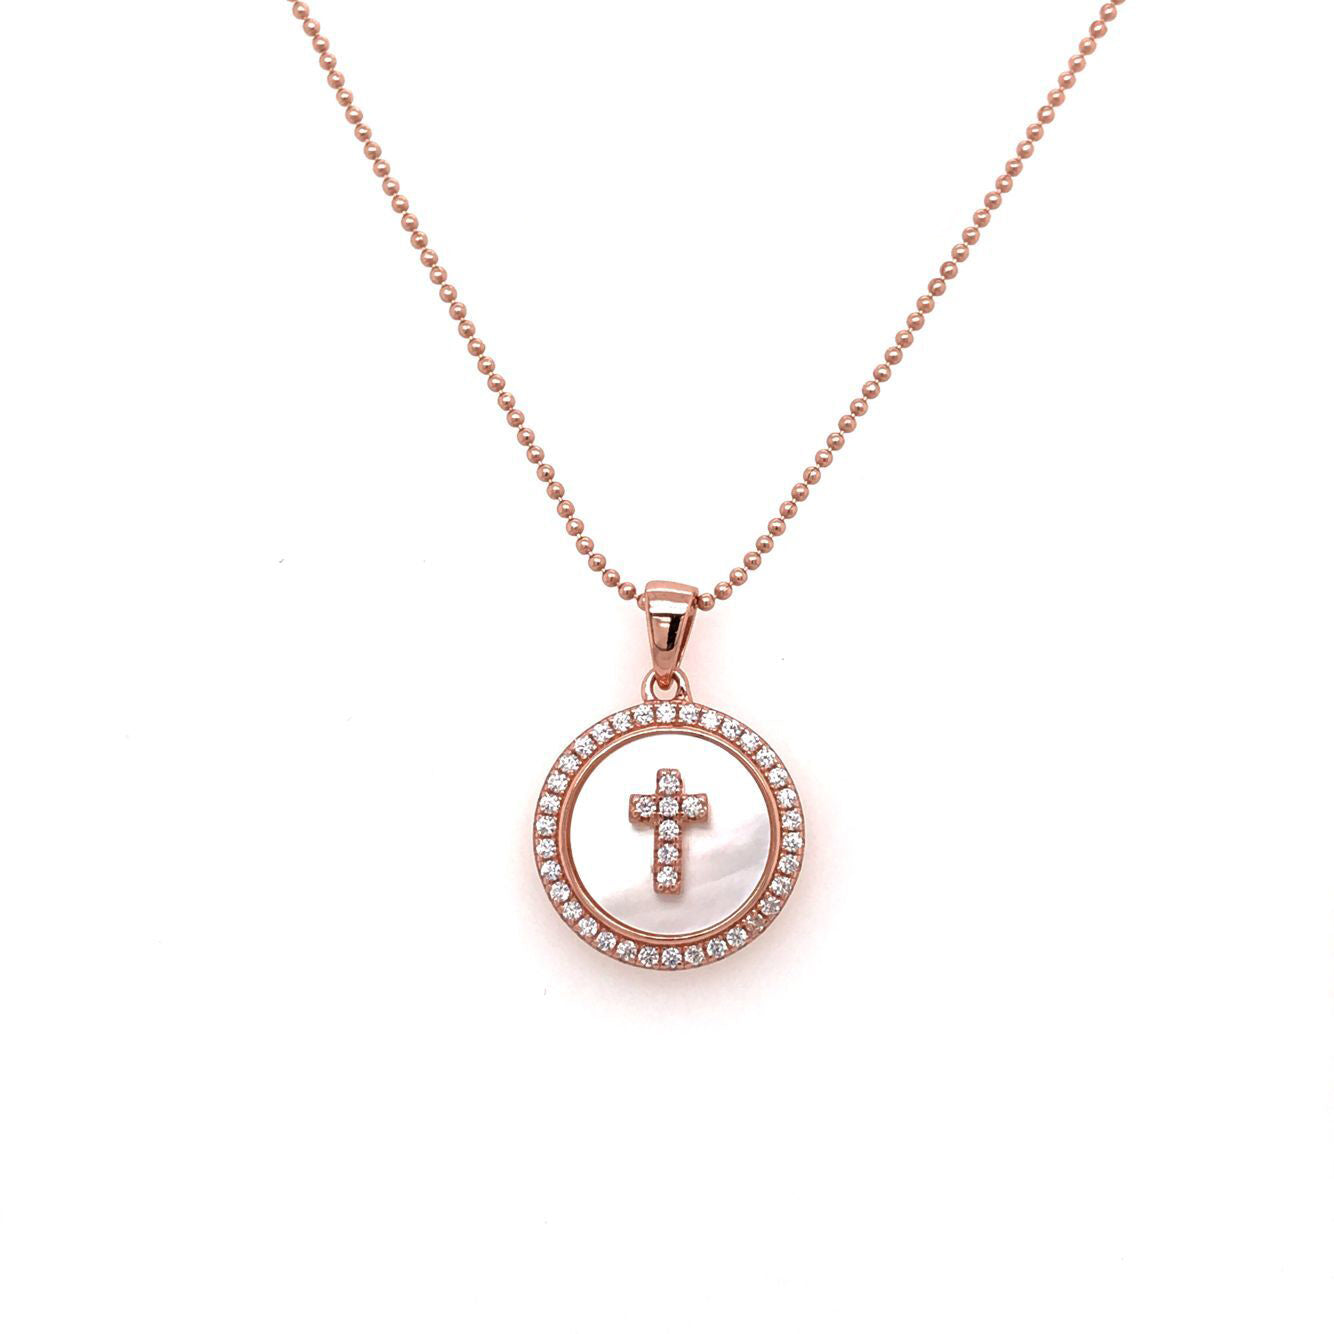 MOTHER OF PEARL CROSS NECKLACE